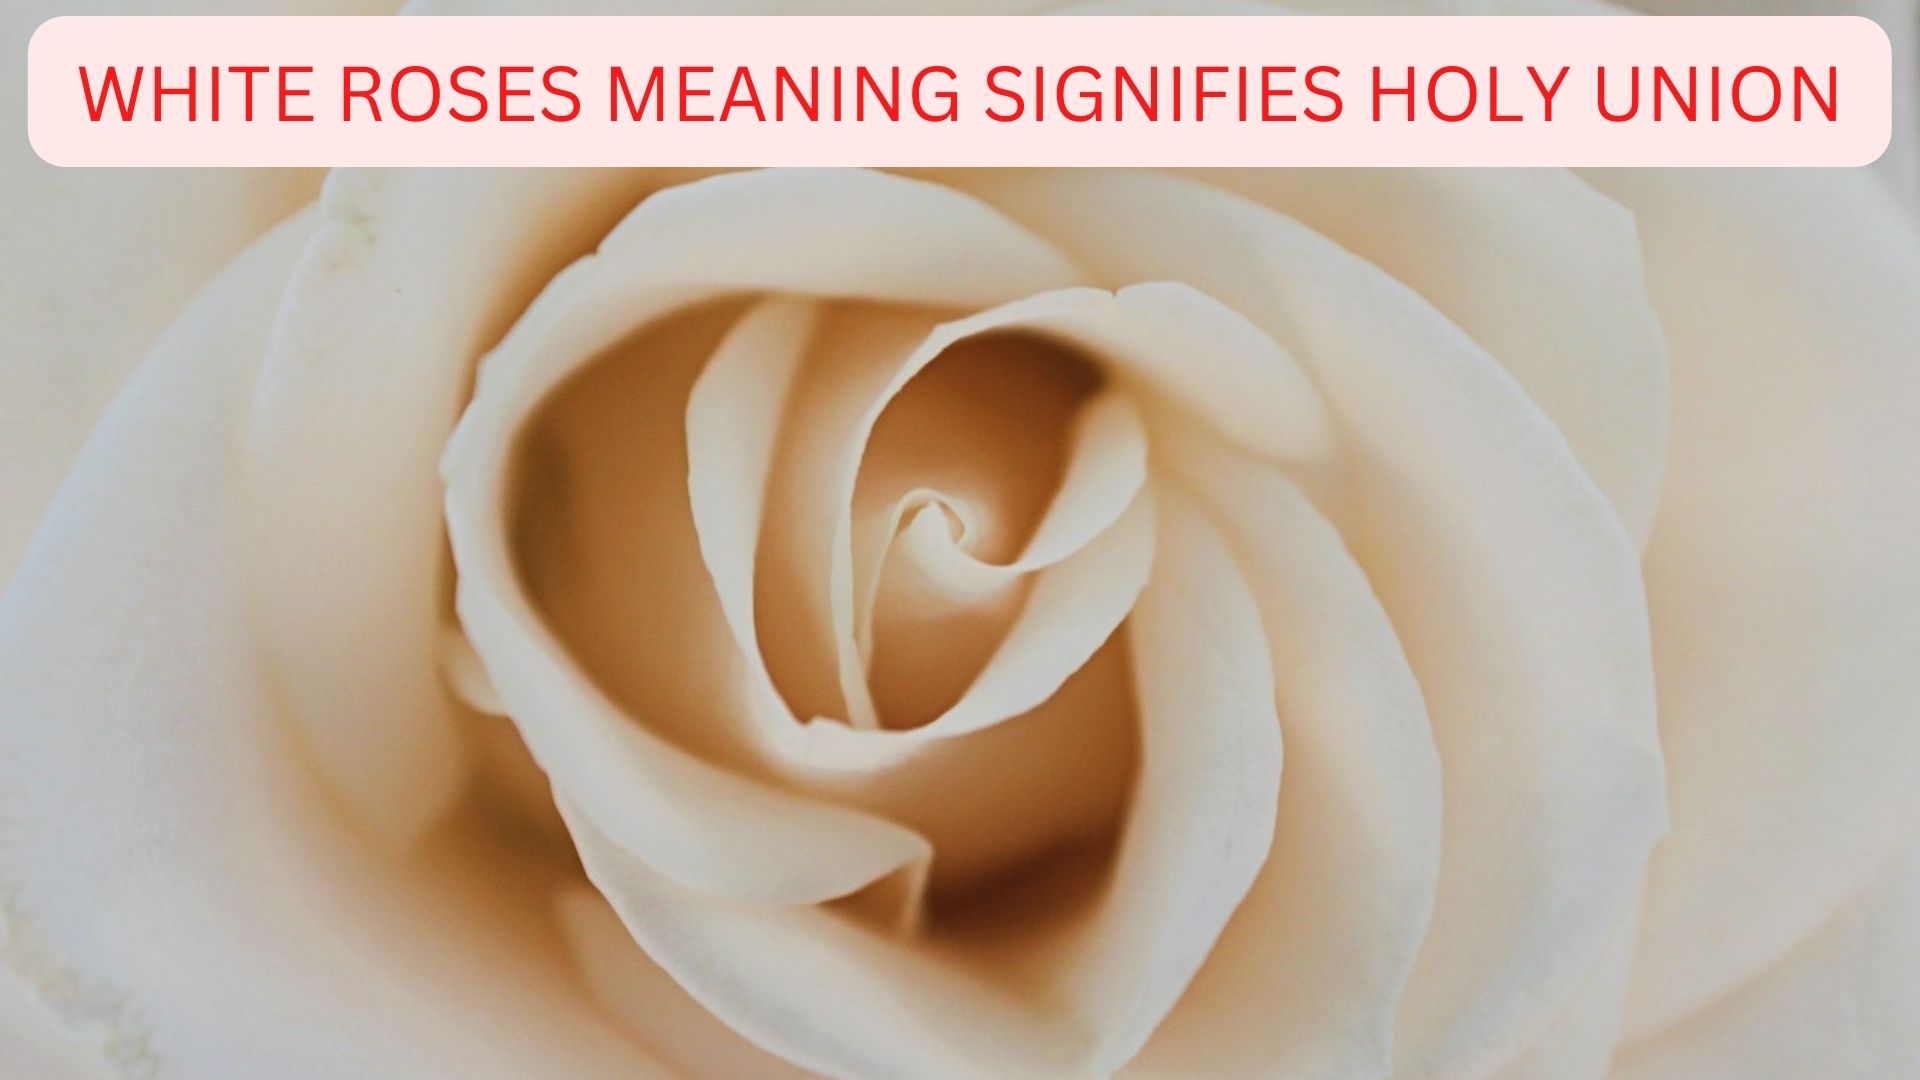 White Roses Meaning Significance - Holy Union